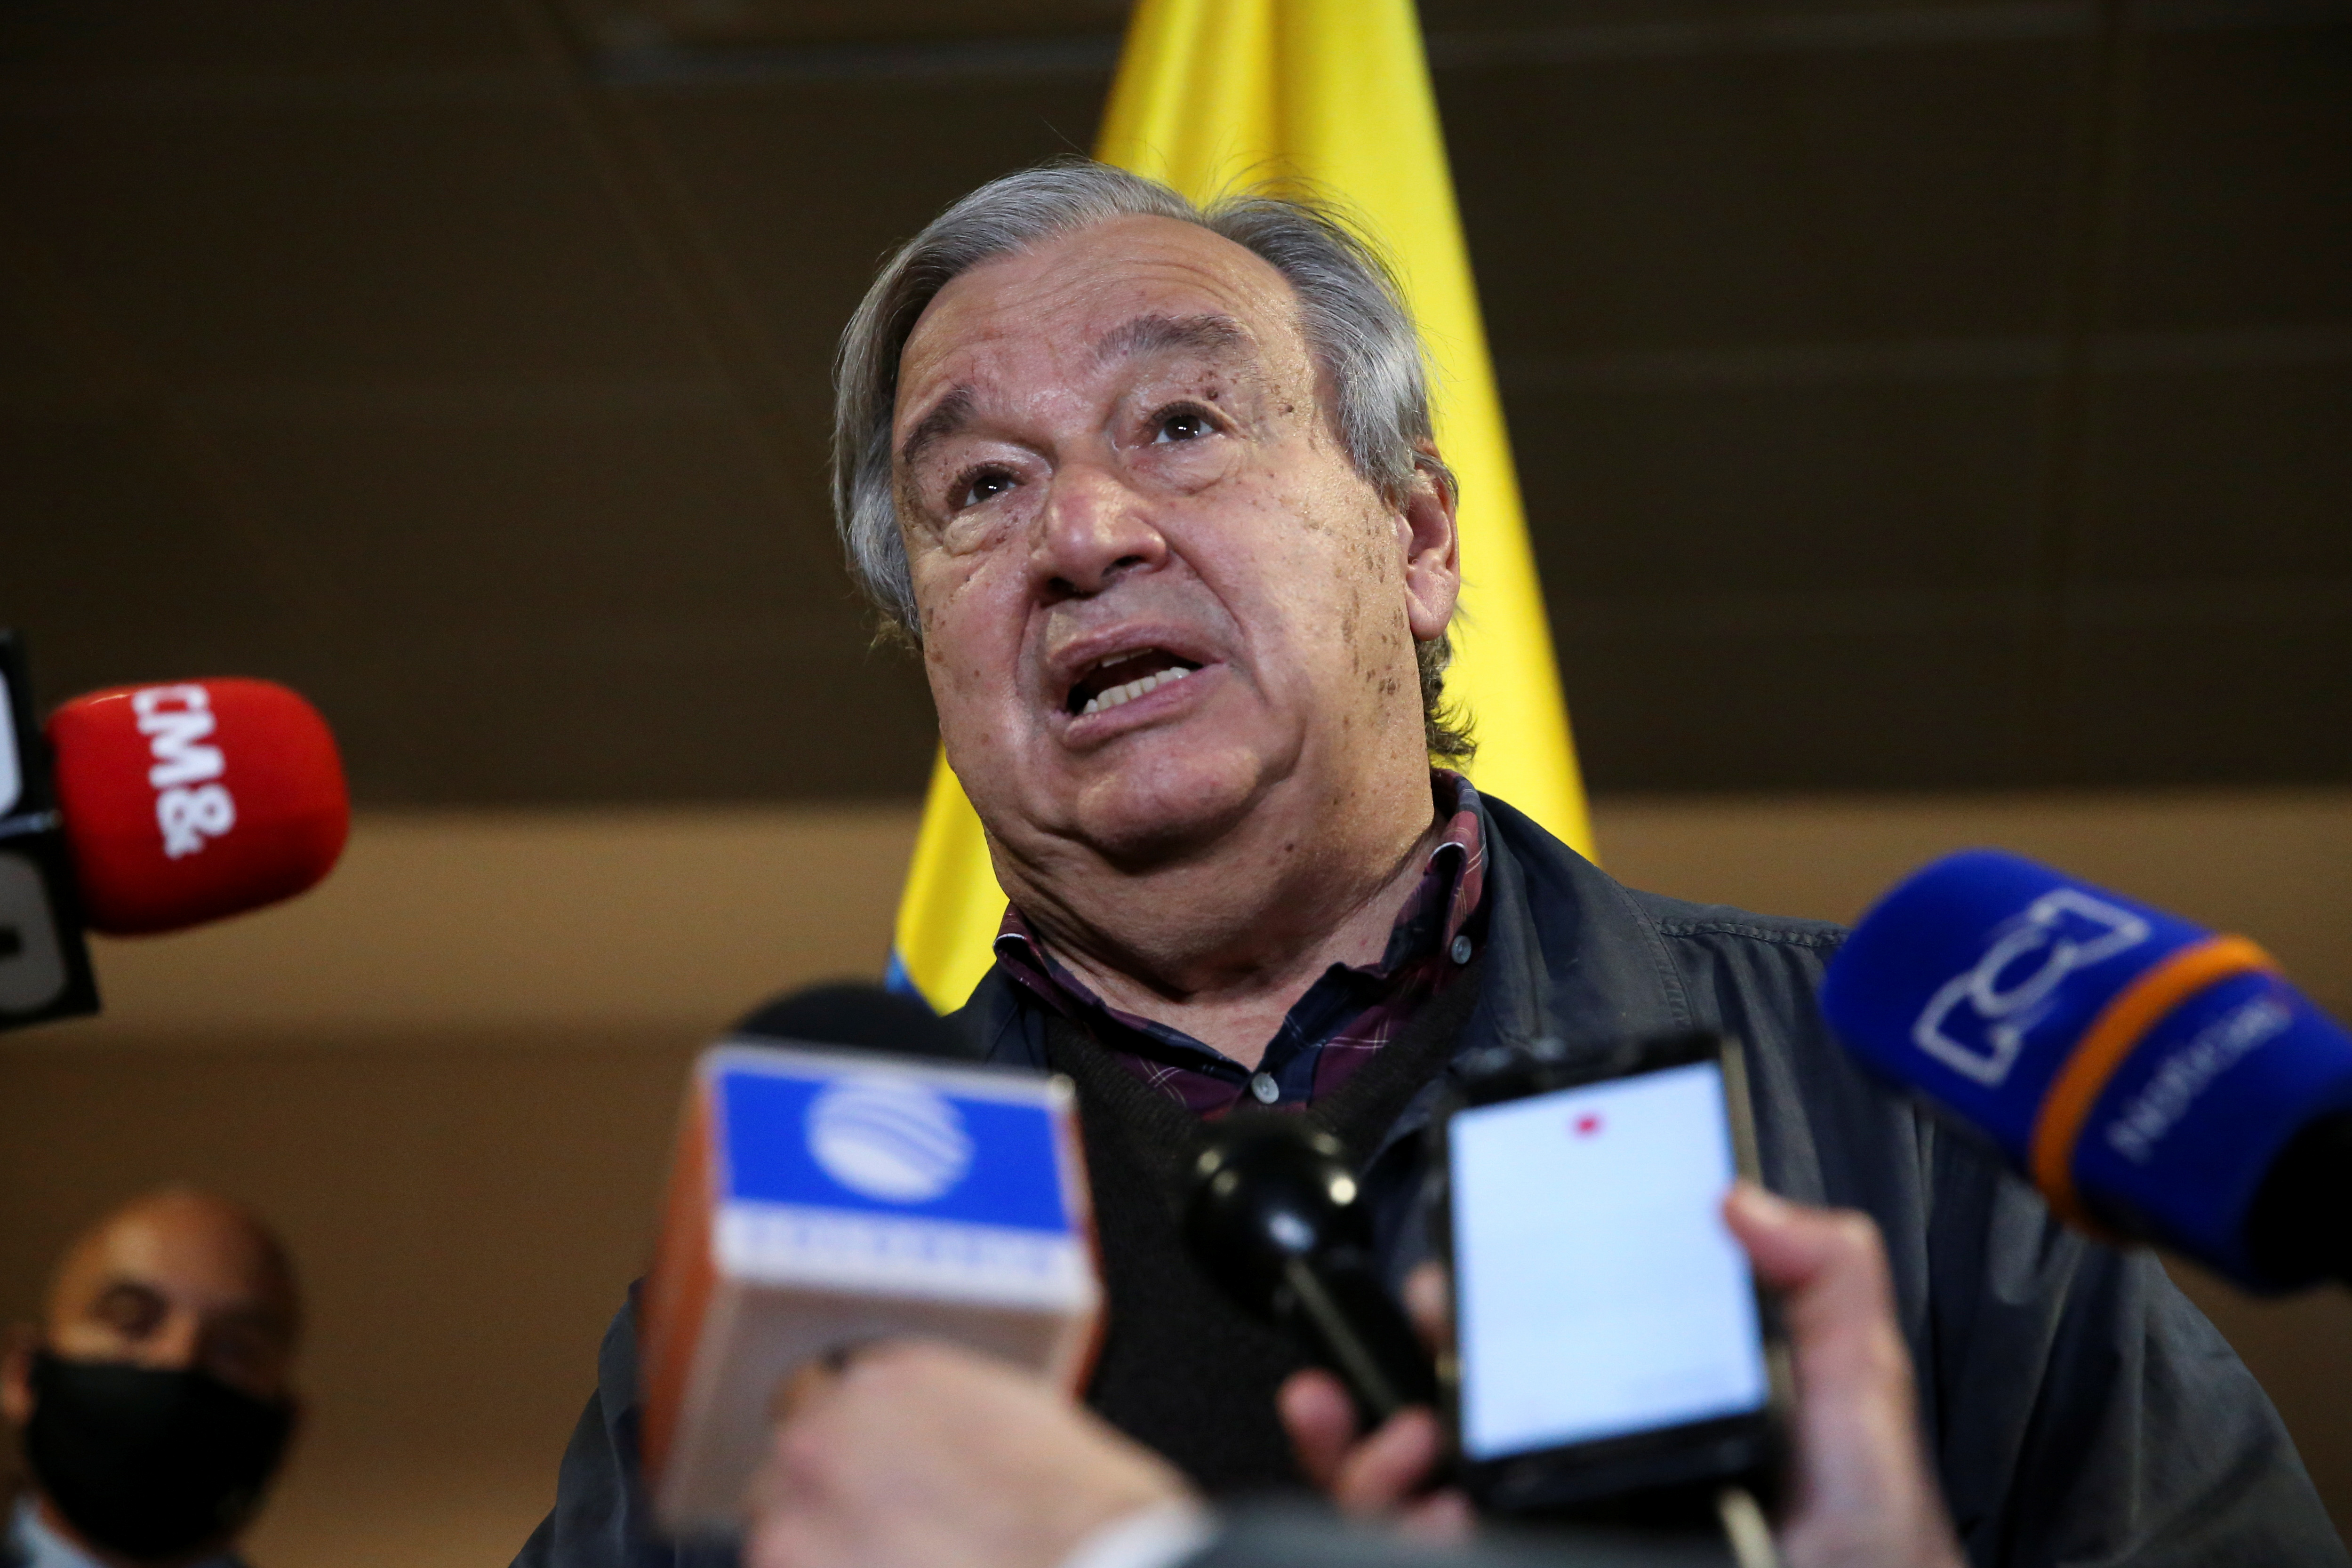 UN Secretary General Antonio Guterres speaks to the press as he arrives in Colombia to commemorate the fifth anniversary of the signing of the peace agreement between the Colombian government and the Revolutionary Armed Forces of Colombia, in Bogota